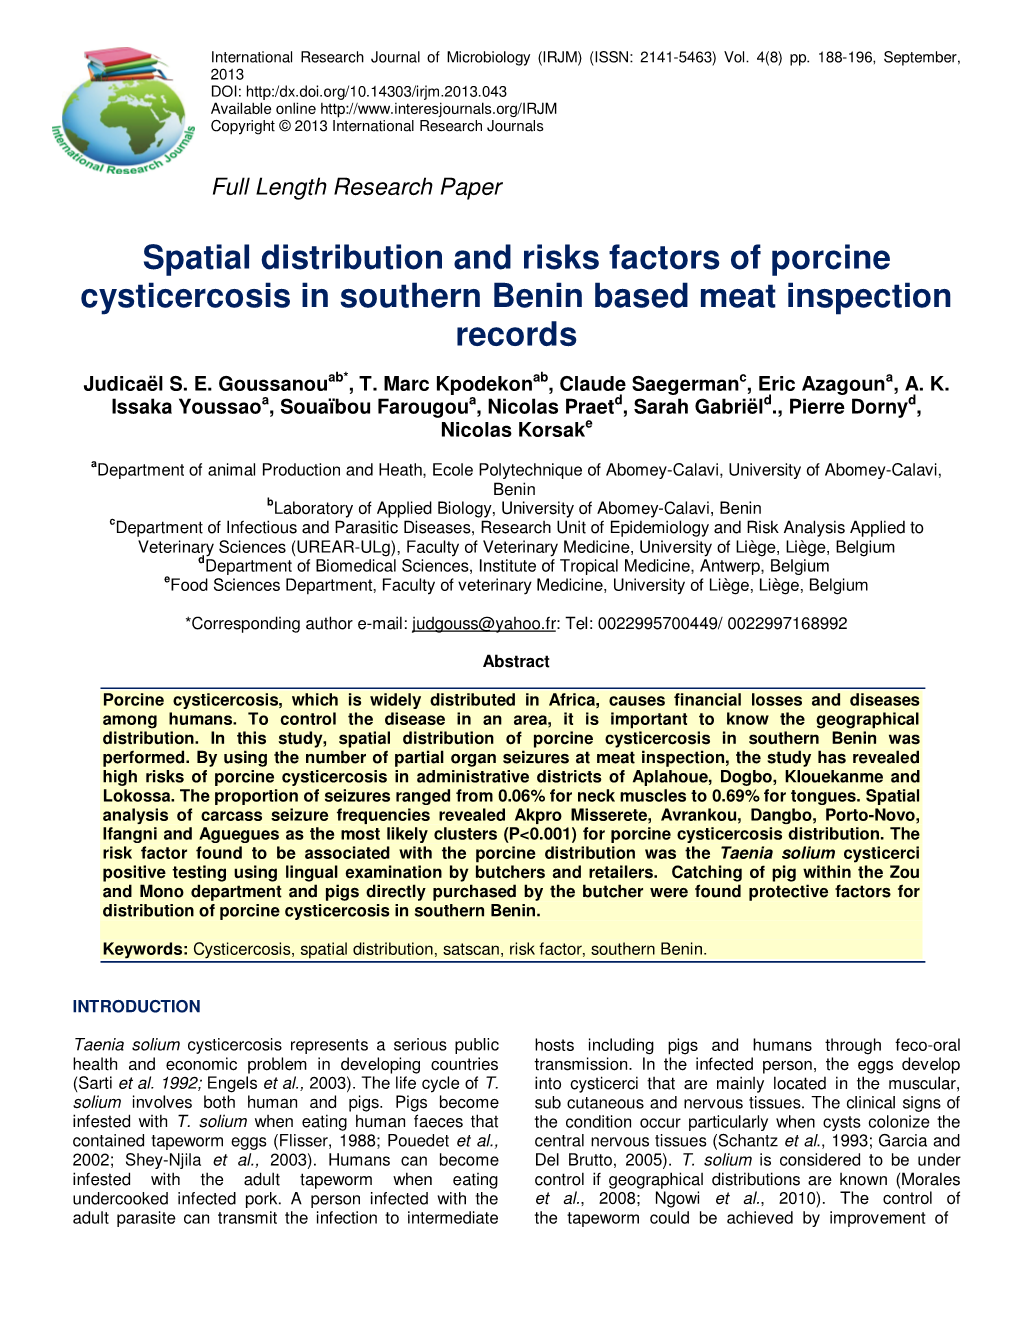 Spatial Distribution and Risks Factors of Porcine Cysticercosis in Southern Benin Based Meat Inspection Records